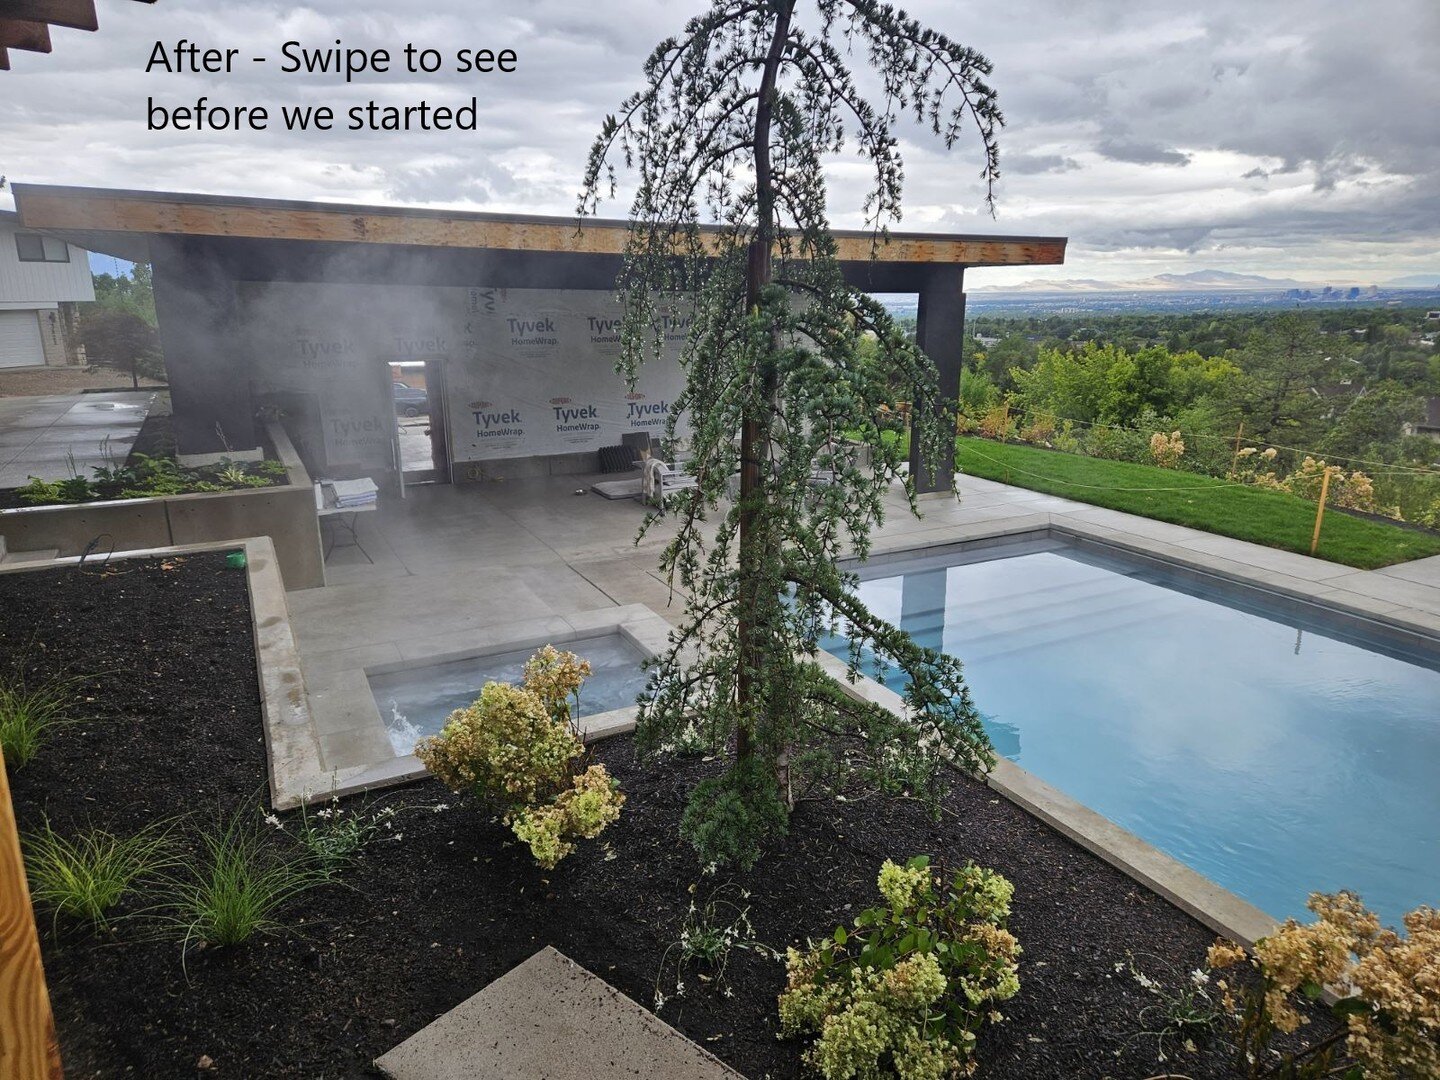 This jaw-dropping transformation has created a functional recreation and relaxation outdoor space from our client's steeply sloped lawn. We love how this turned out!
Landscape design by @simschwobe 
Pool subcontractor Aspen Pools
#landscapedesign #la